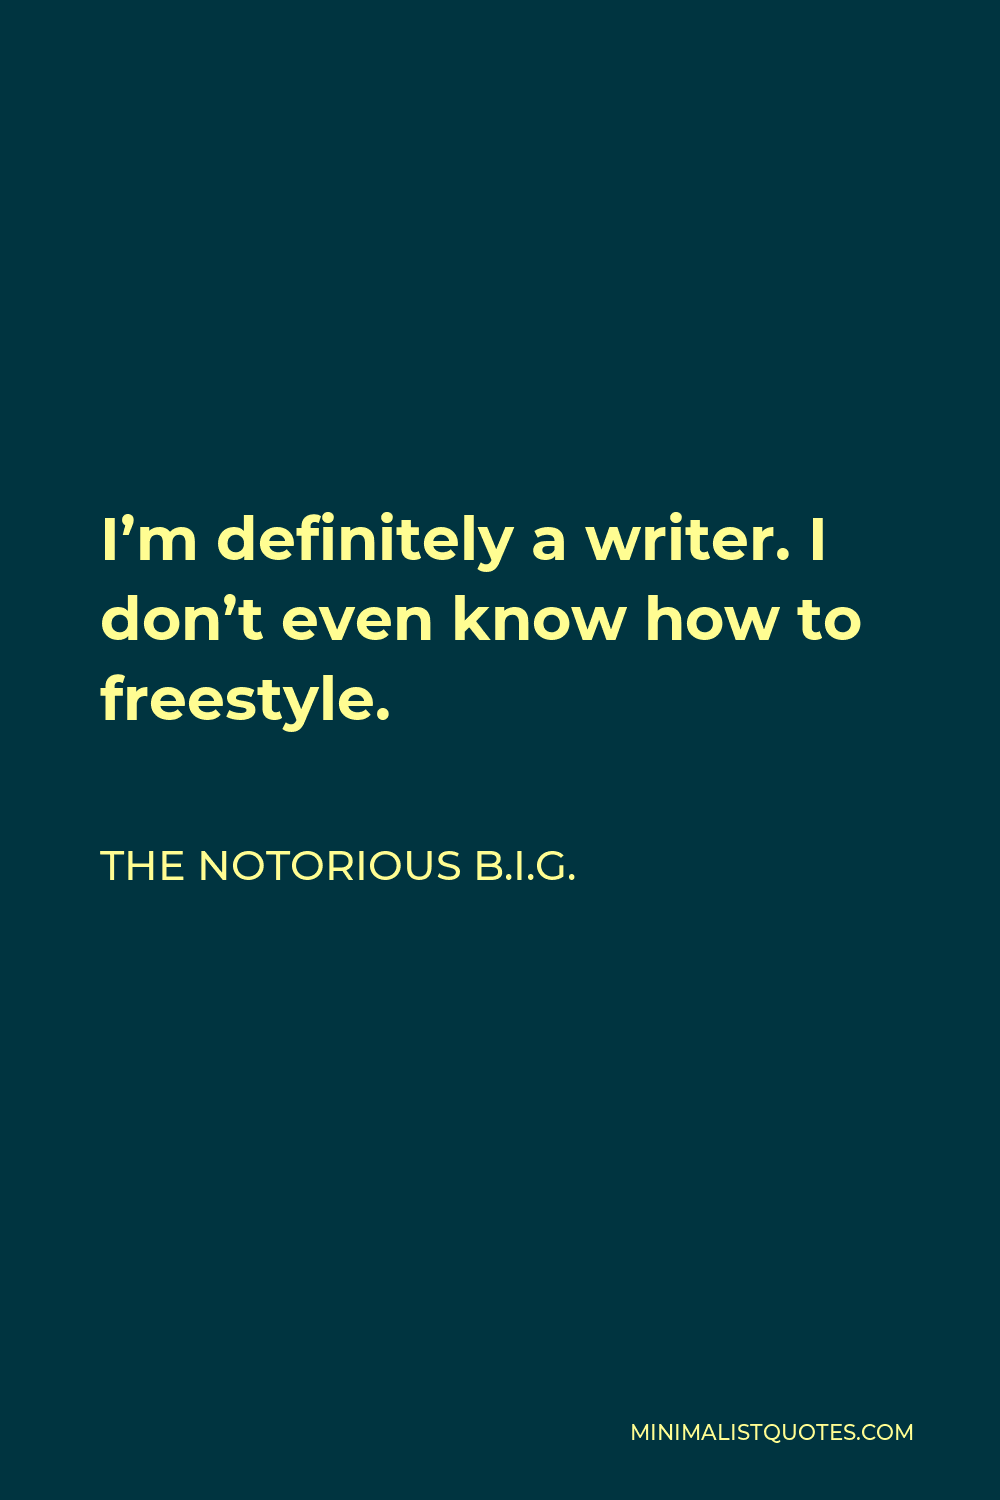 The Notorious B.I.G. Quote - I’m definitely a writer. I don’t even know how to freestyle.